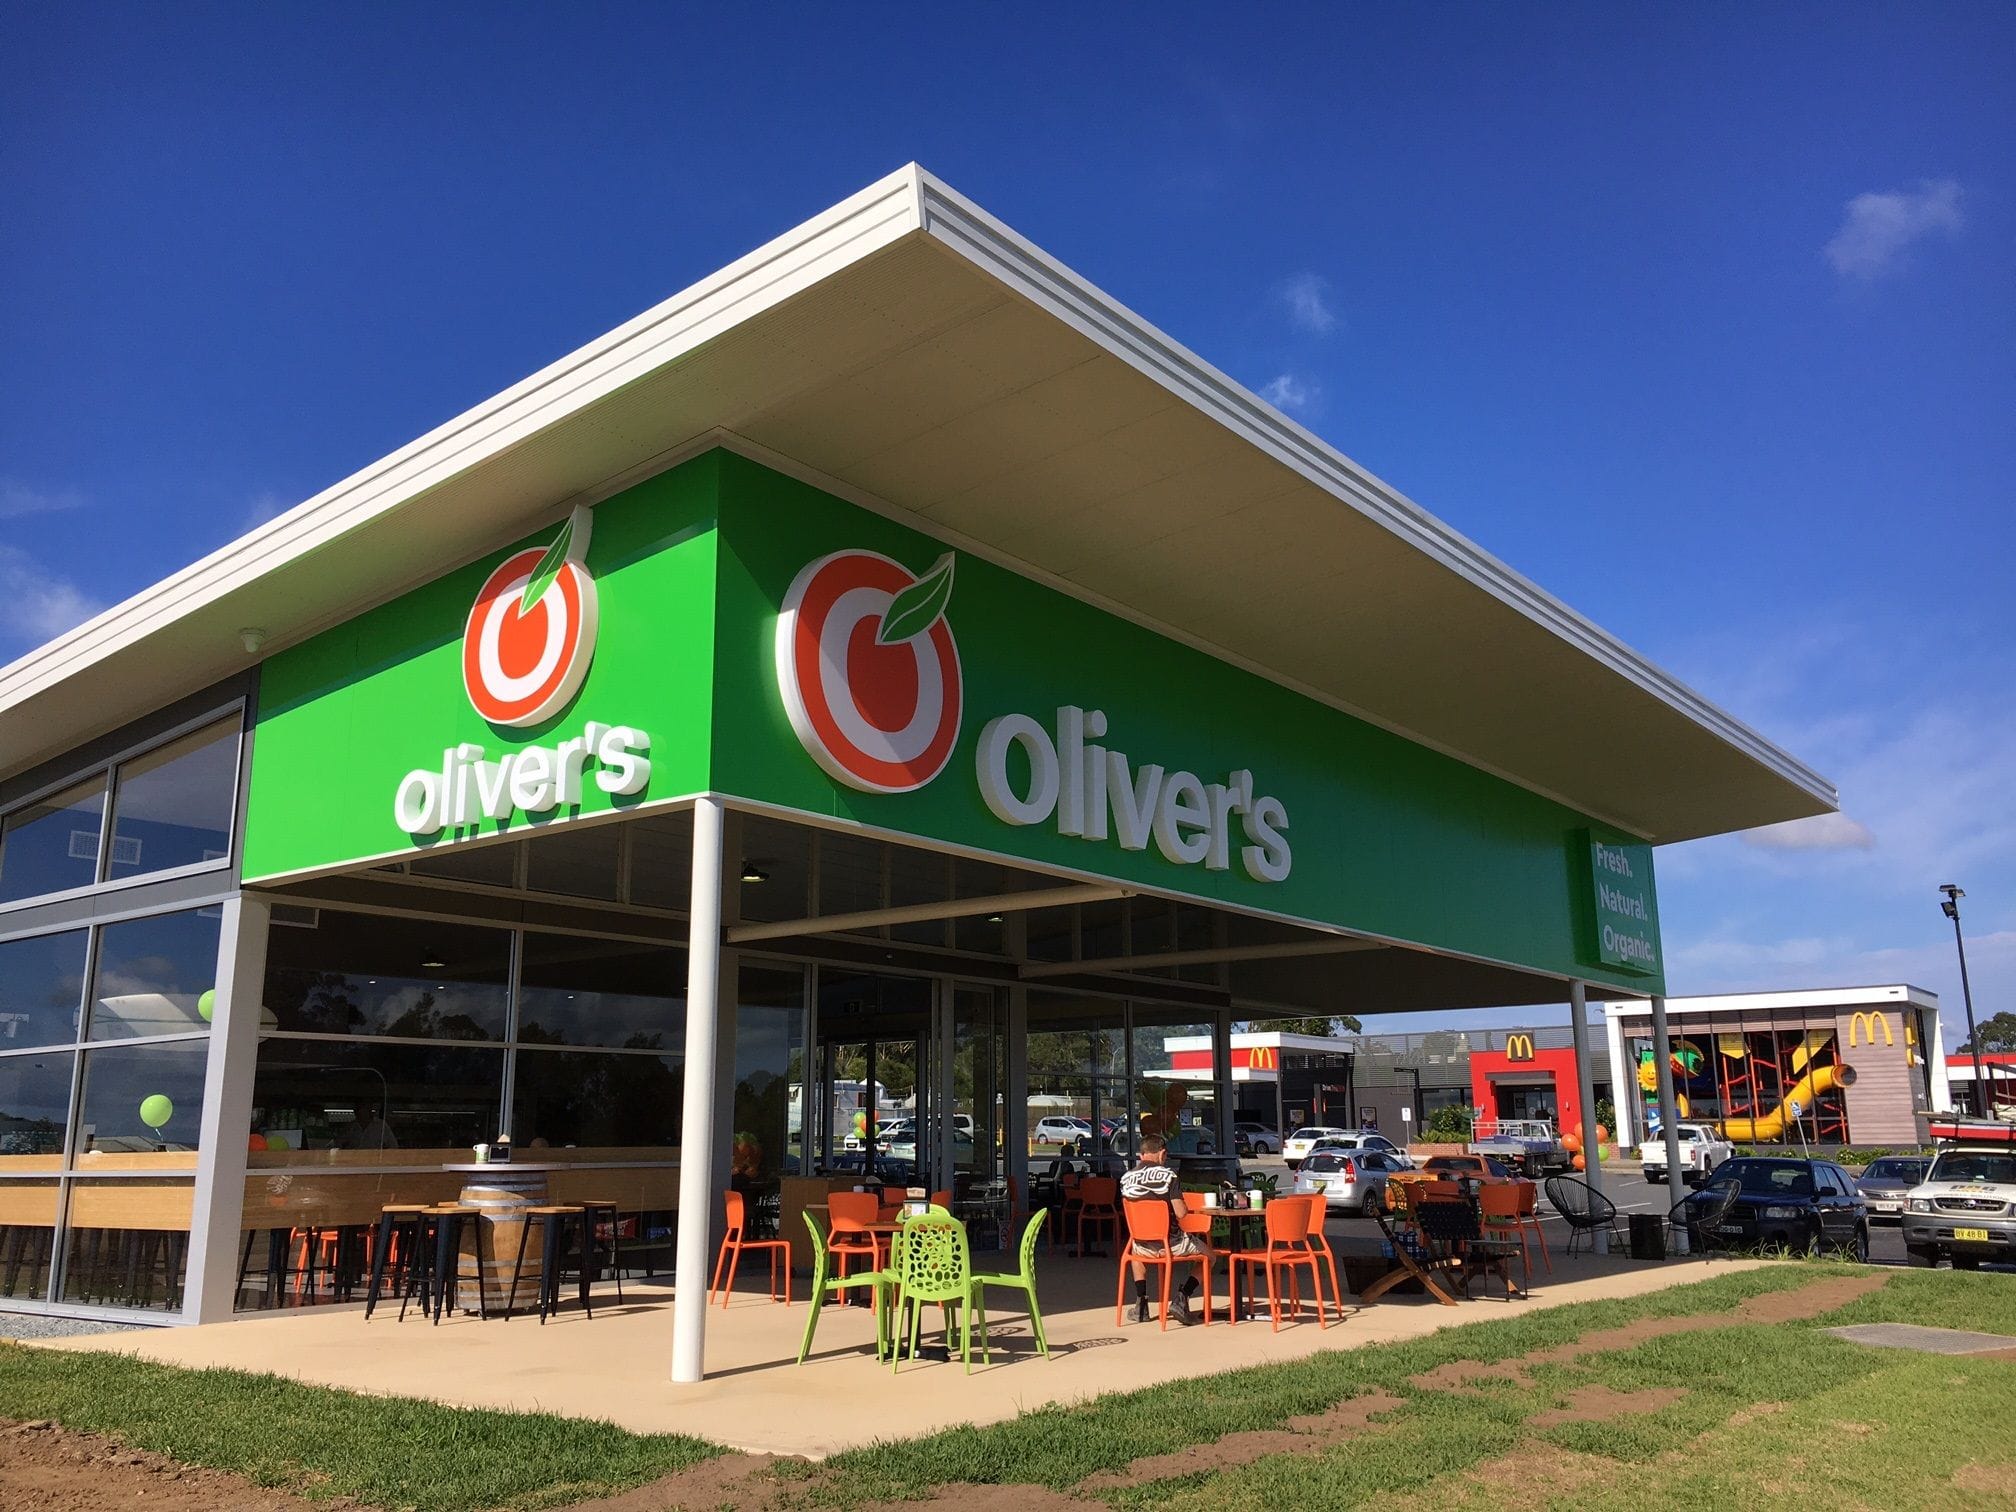 Oliver's largest shareholders lend own money to keep company alive